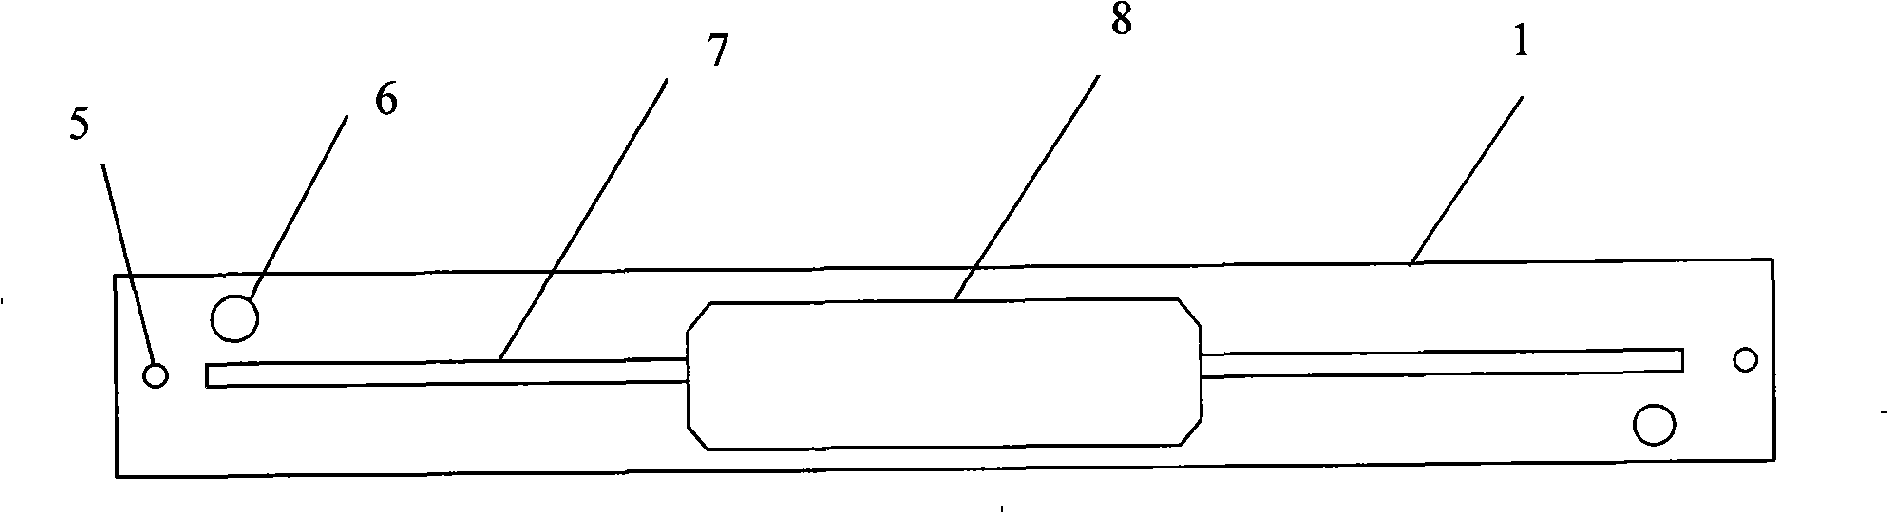 Electronic label reading and writing device antenna and a RFID system